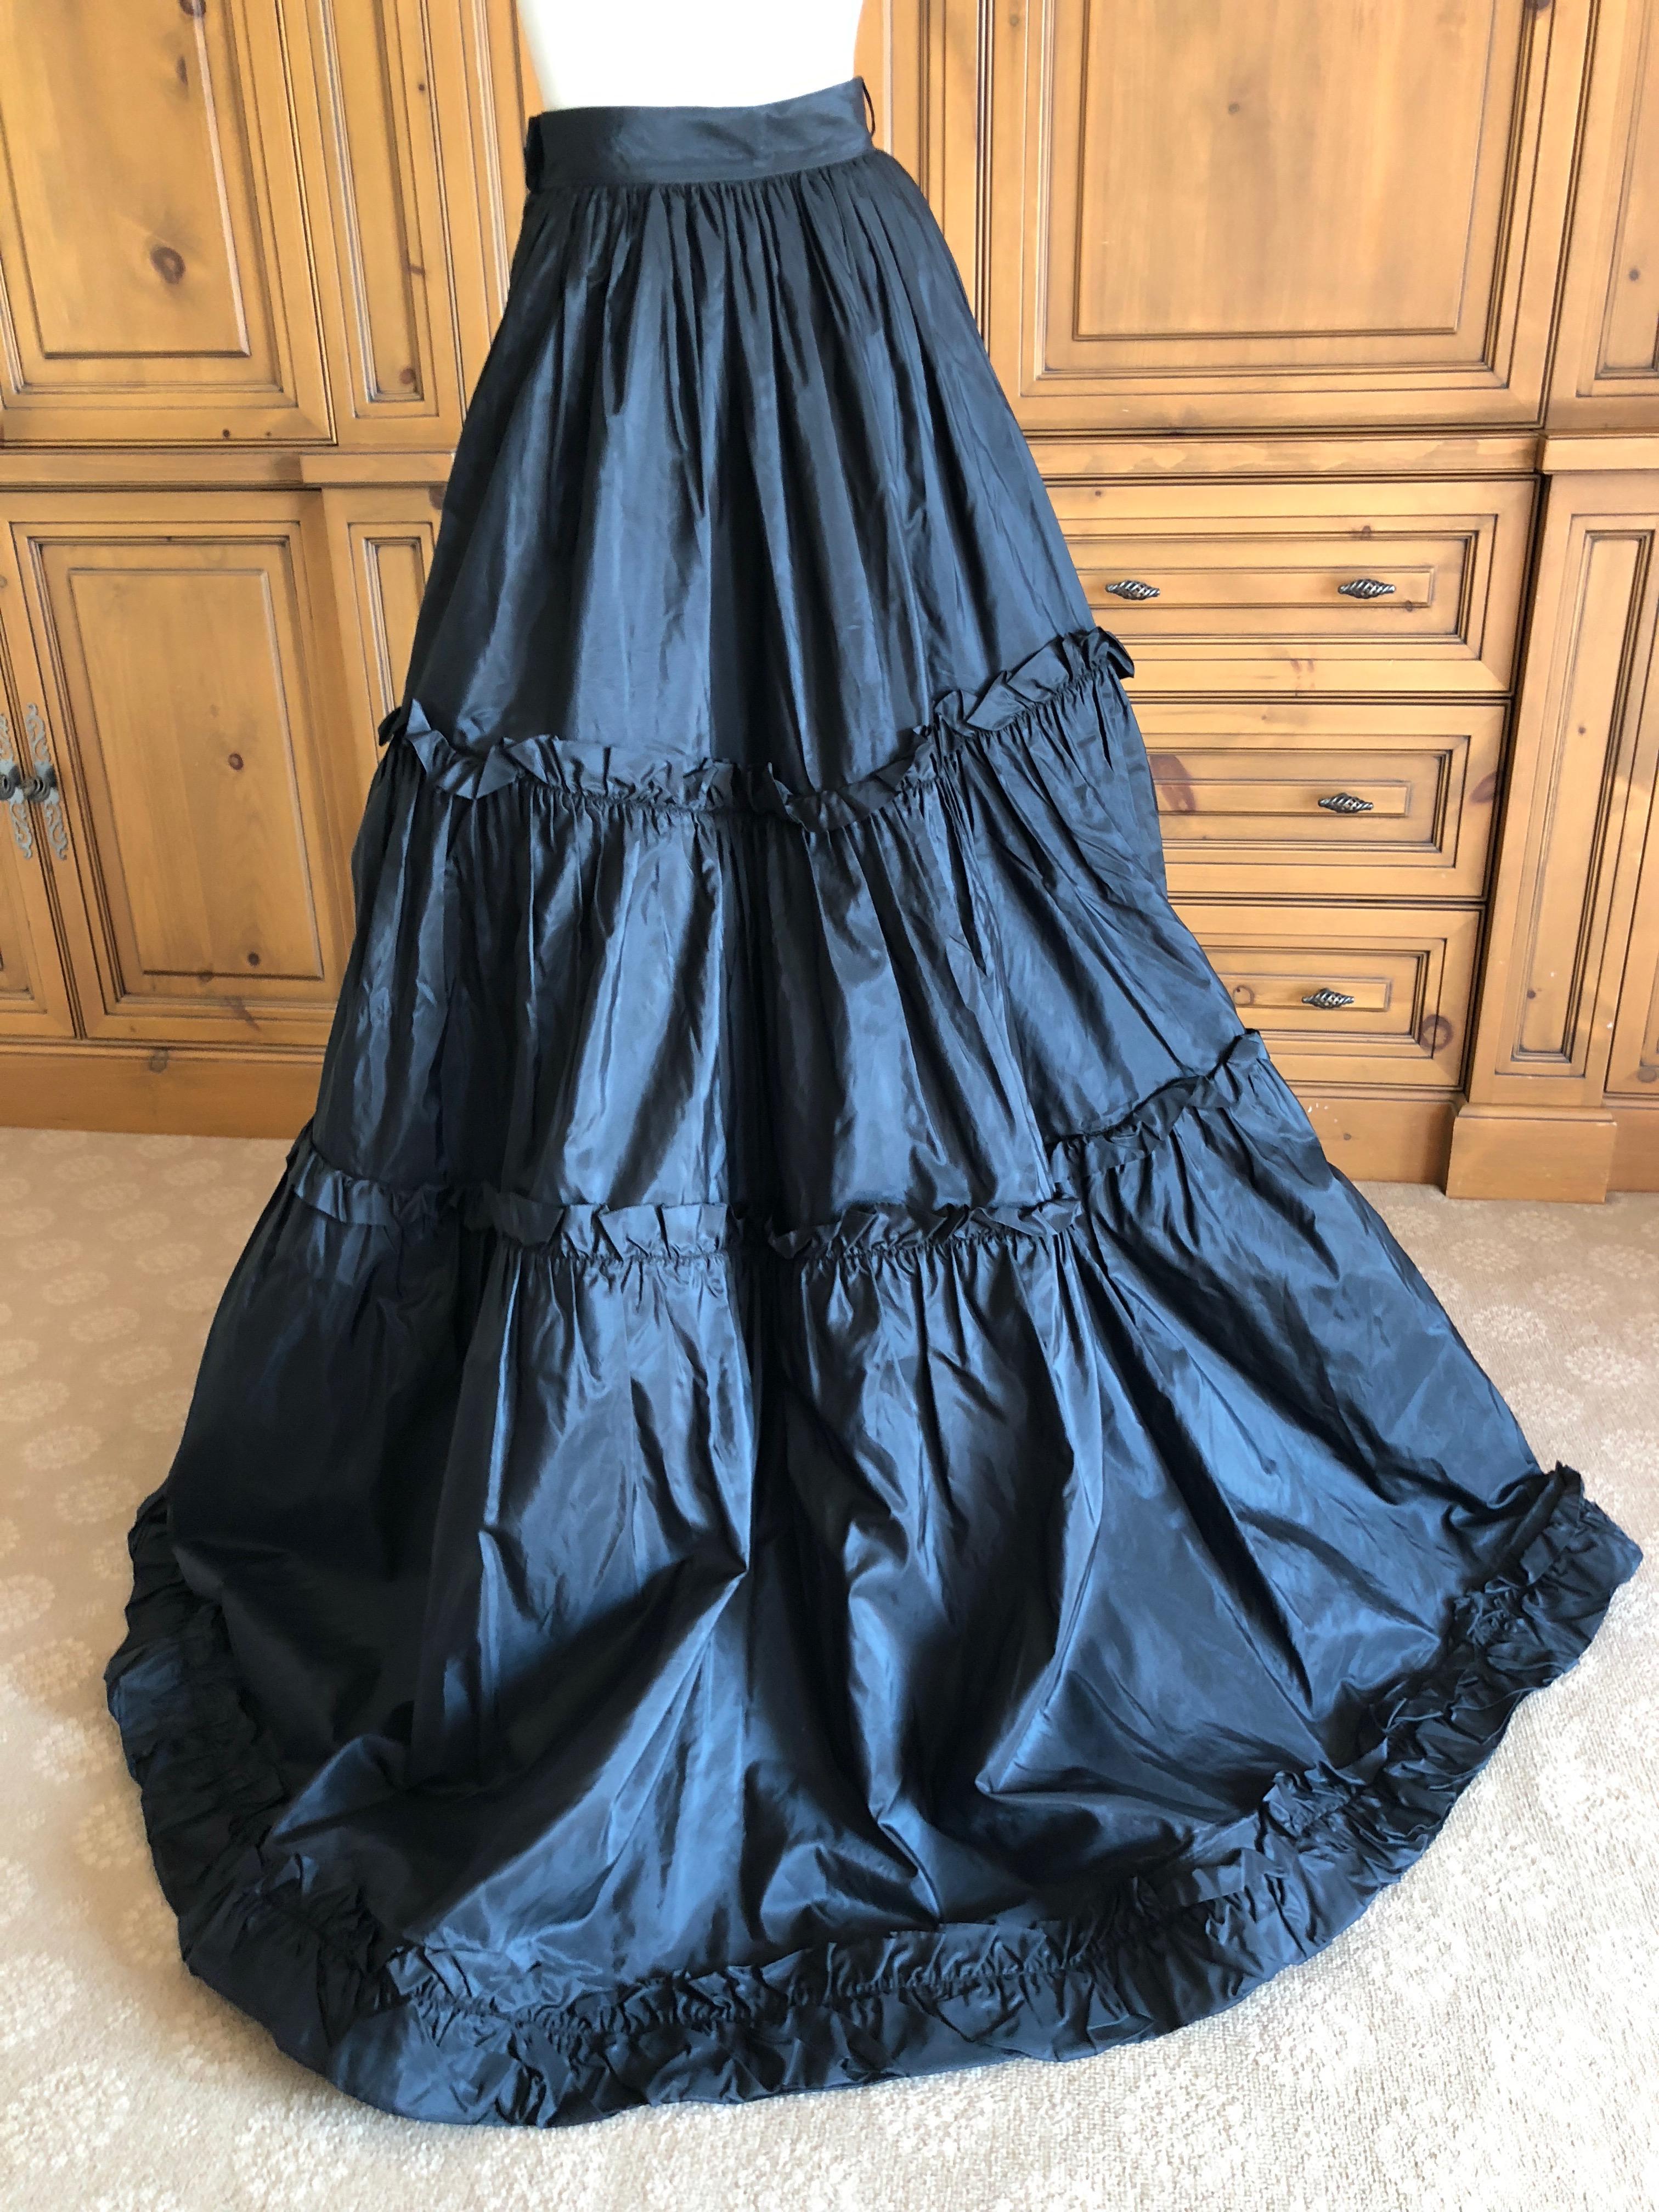 Yves Saint Laurent Rive Guache 1982 Dramatic Black Taffeta Ball Skirt with Train In New Condition For Sale In Cloverdale, CA